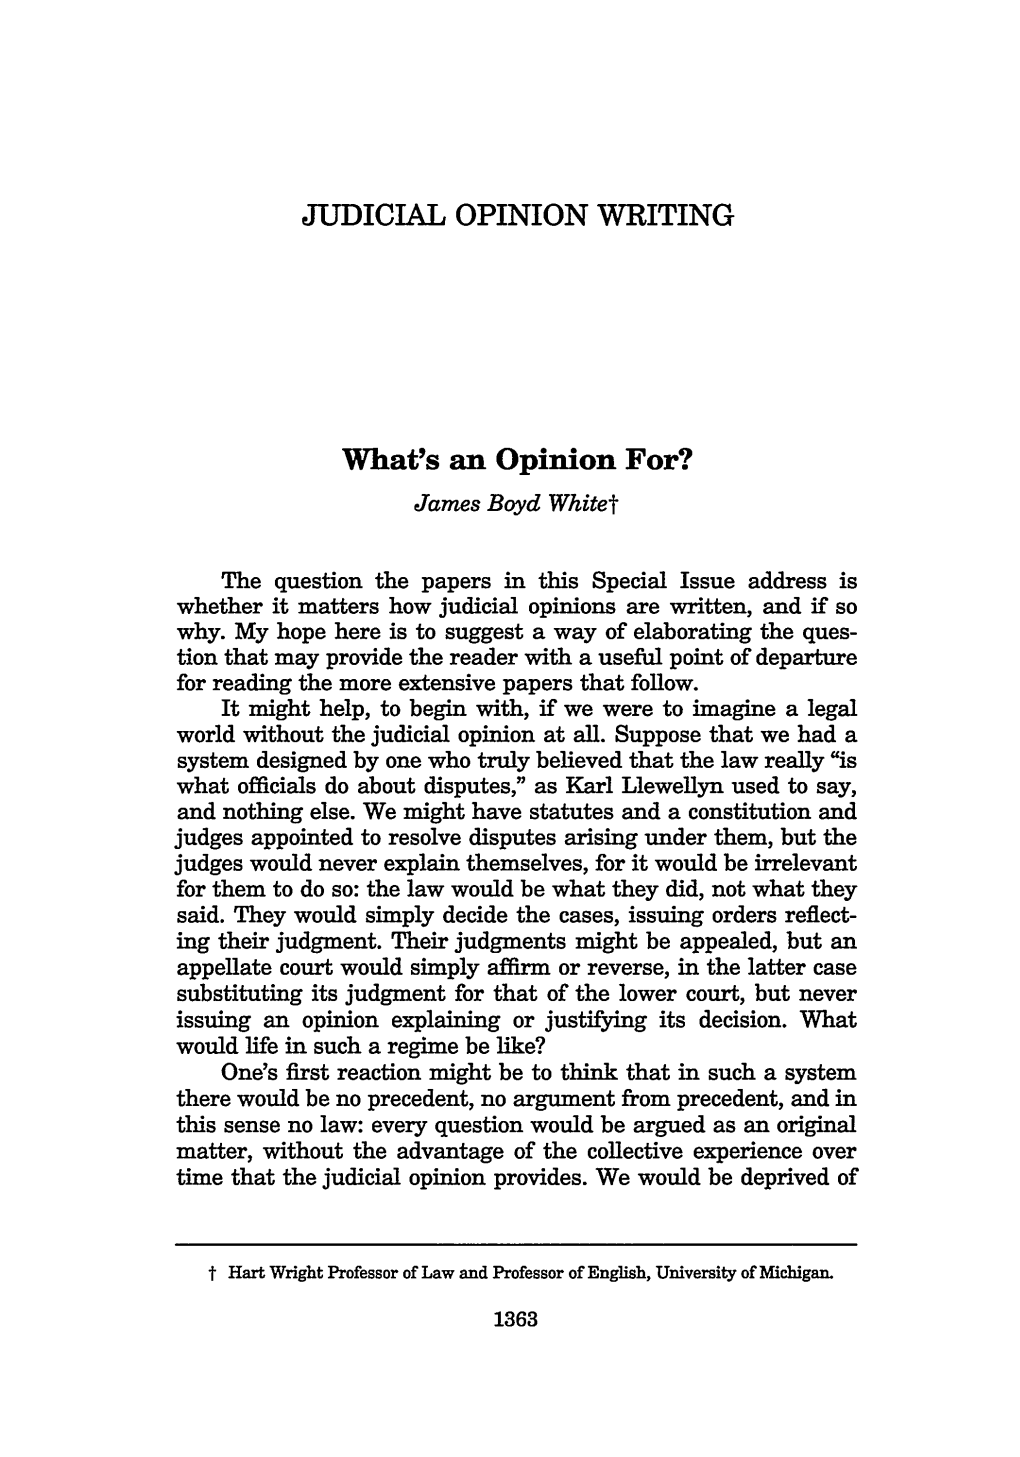 What's an Opinion For? James Boyd Whitet